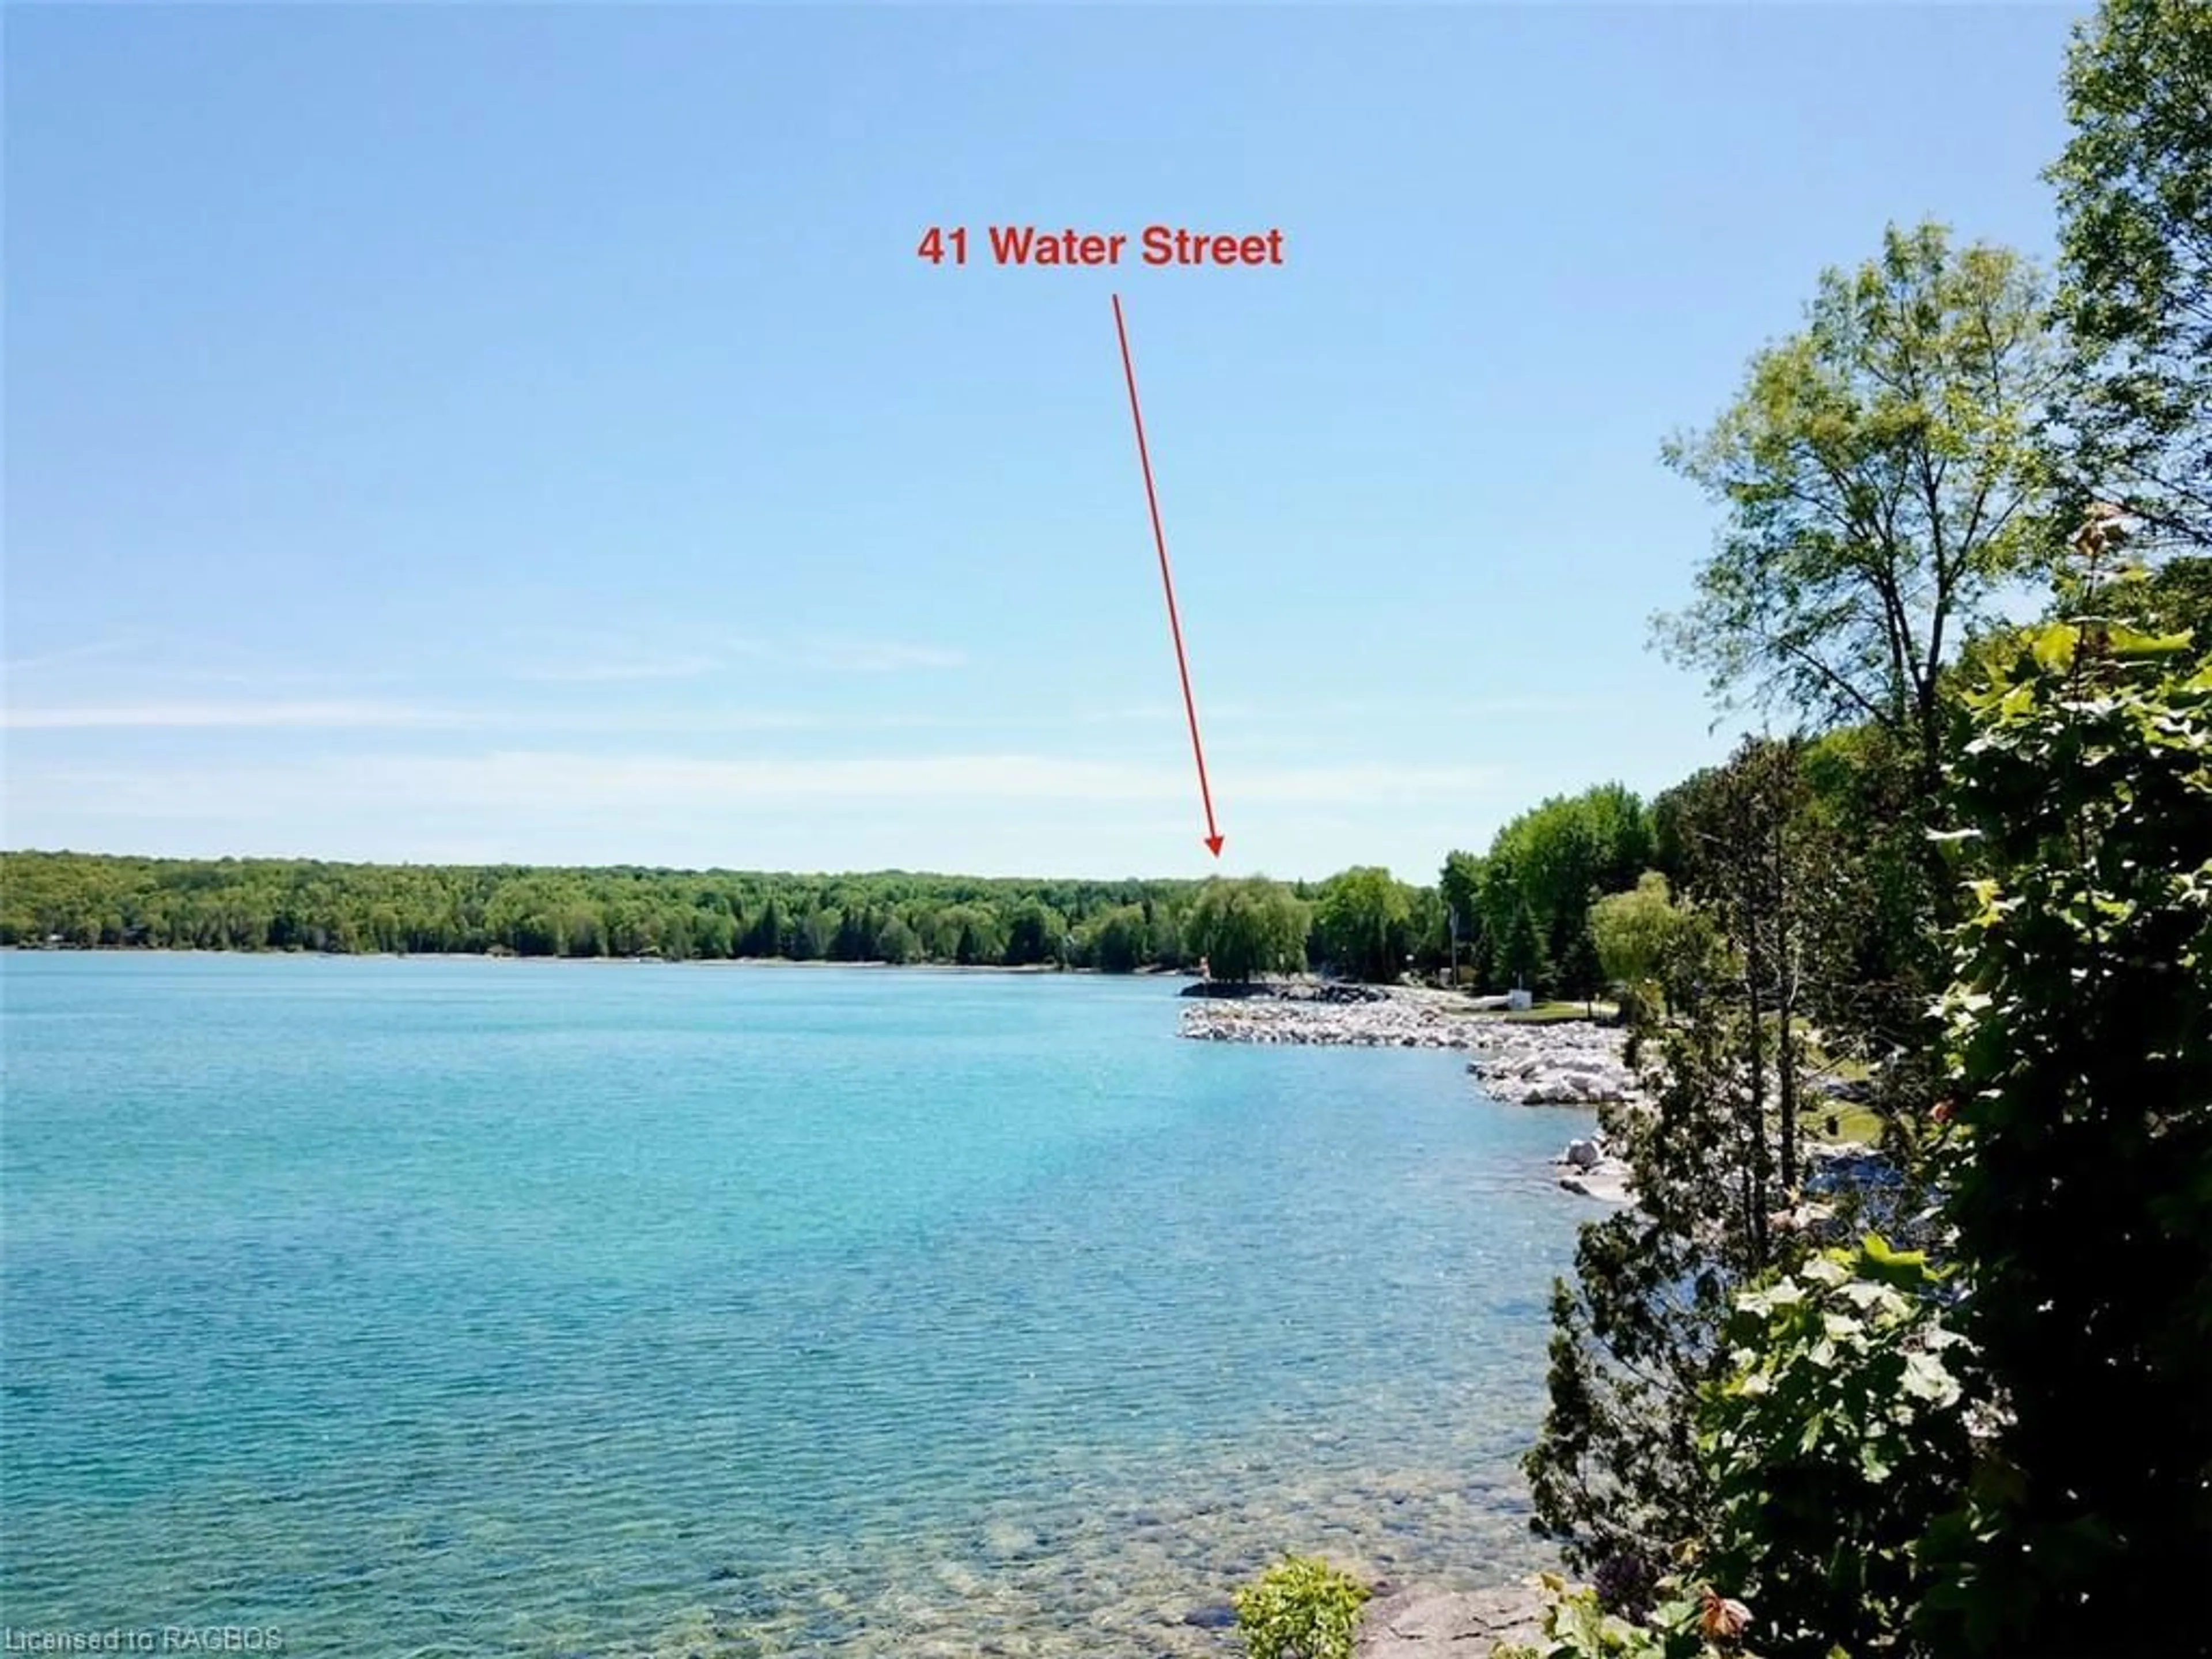 Street view for 41 Water St, South Bruce Peninsula Ontario N0H 2T0